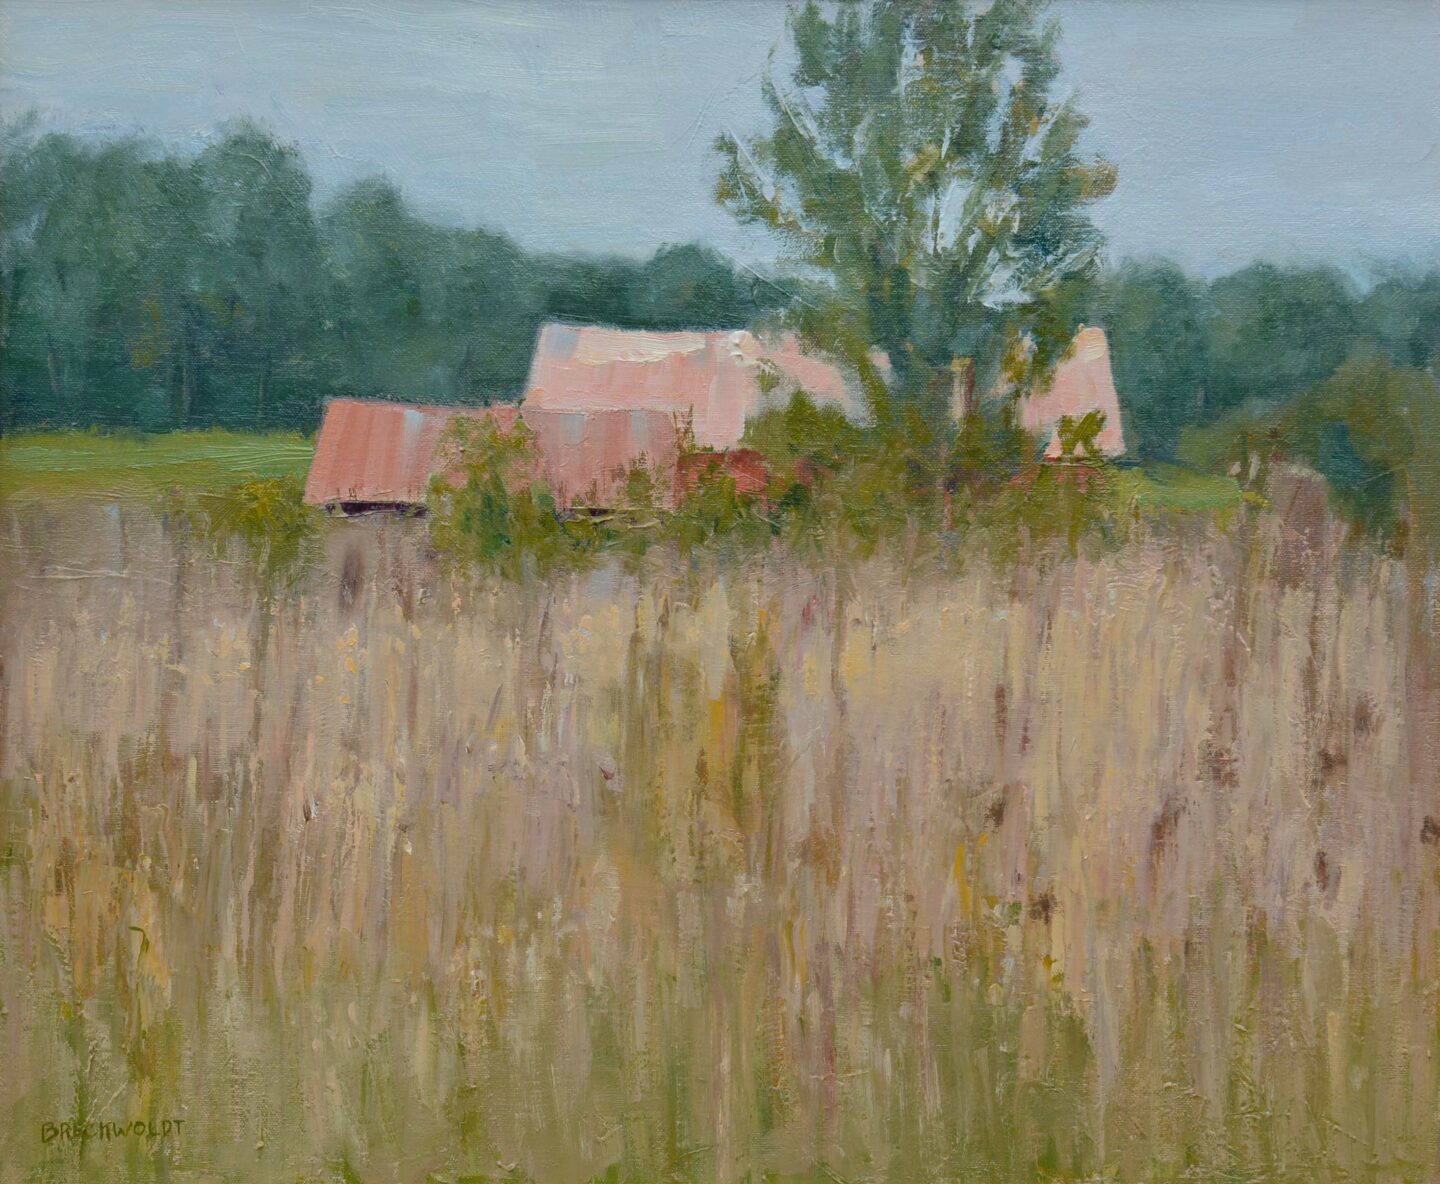 Barn painting in oil.